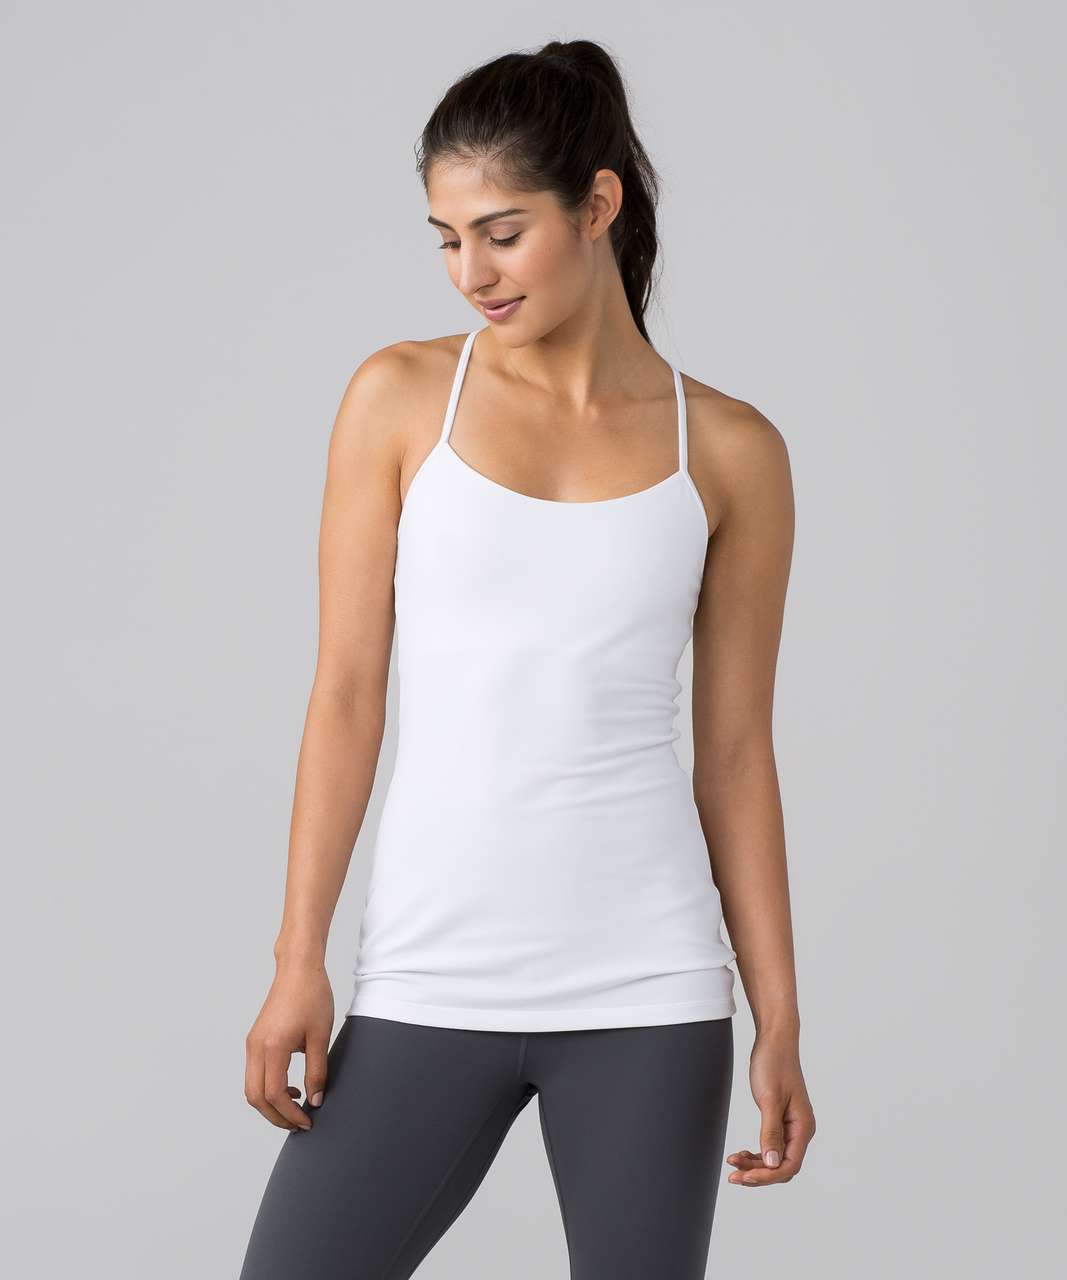 Lululemon Power Pose Tank *Light Support For A/B Cup - White